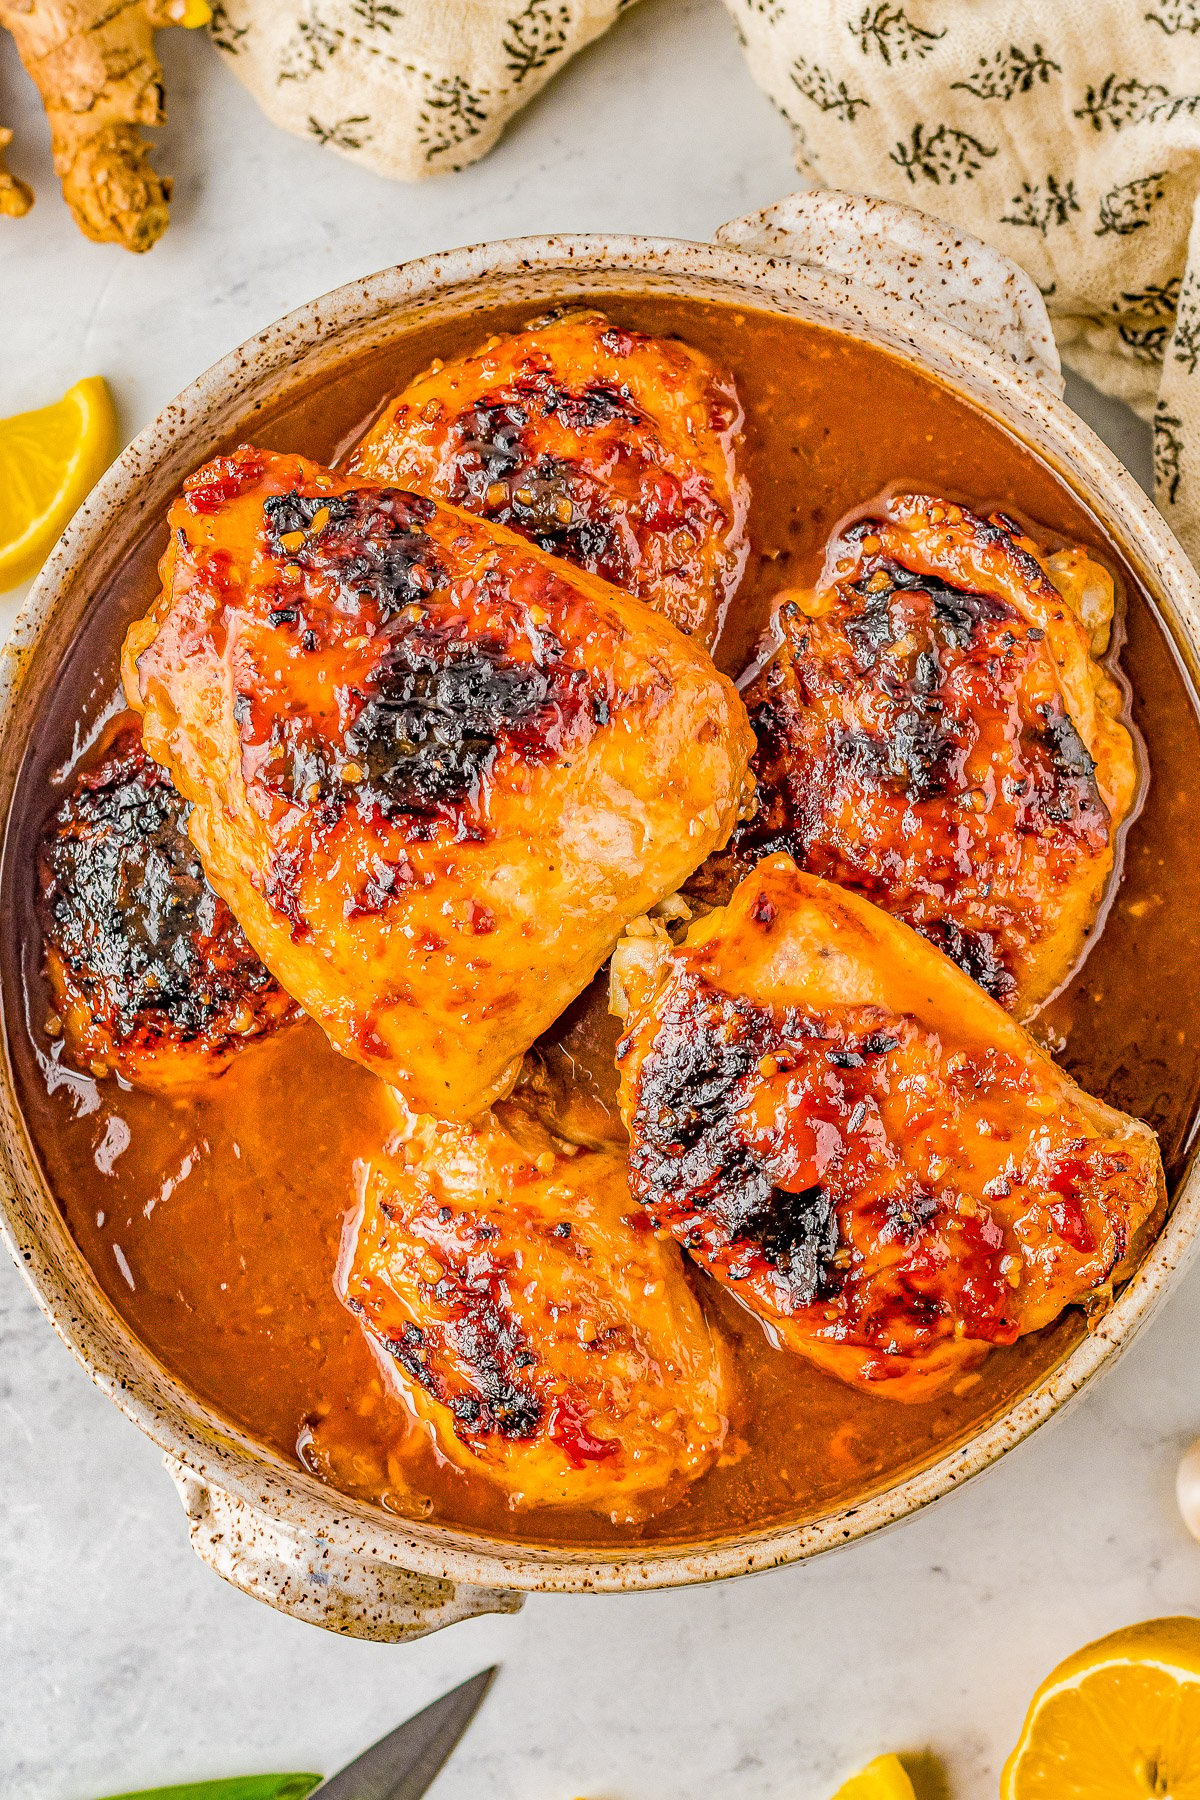 Honey Soy Baked Chicken Thighs - The chicken marinates in the most delectable mixture of soy sauce, honey, garlic, ginger, and more. The resulting baked chicken is SO tender, juicy, moist, and loaded with Asian-inspired flavors! Even better, this is a one-pan, EASY recipe the whole family will adore! 